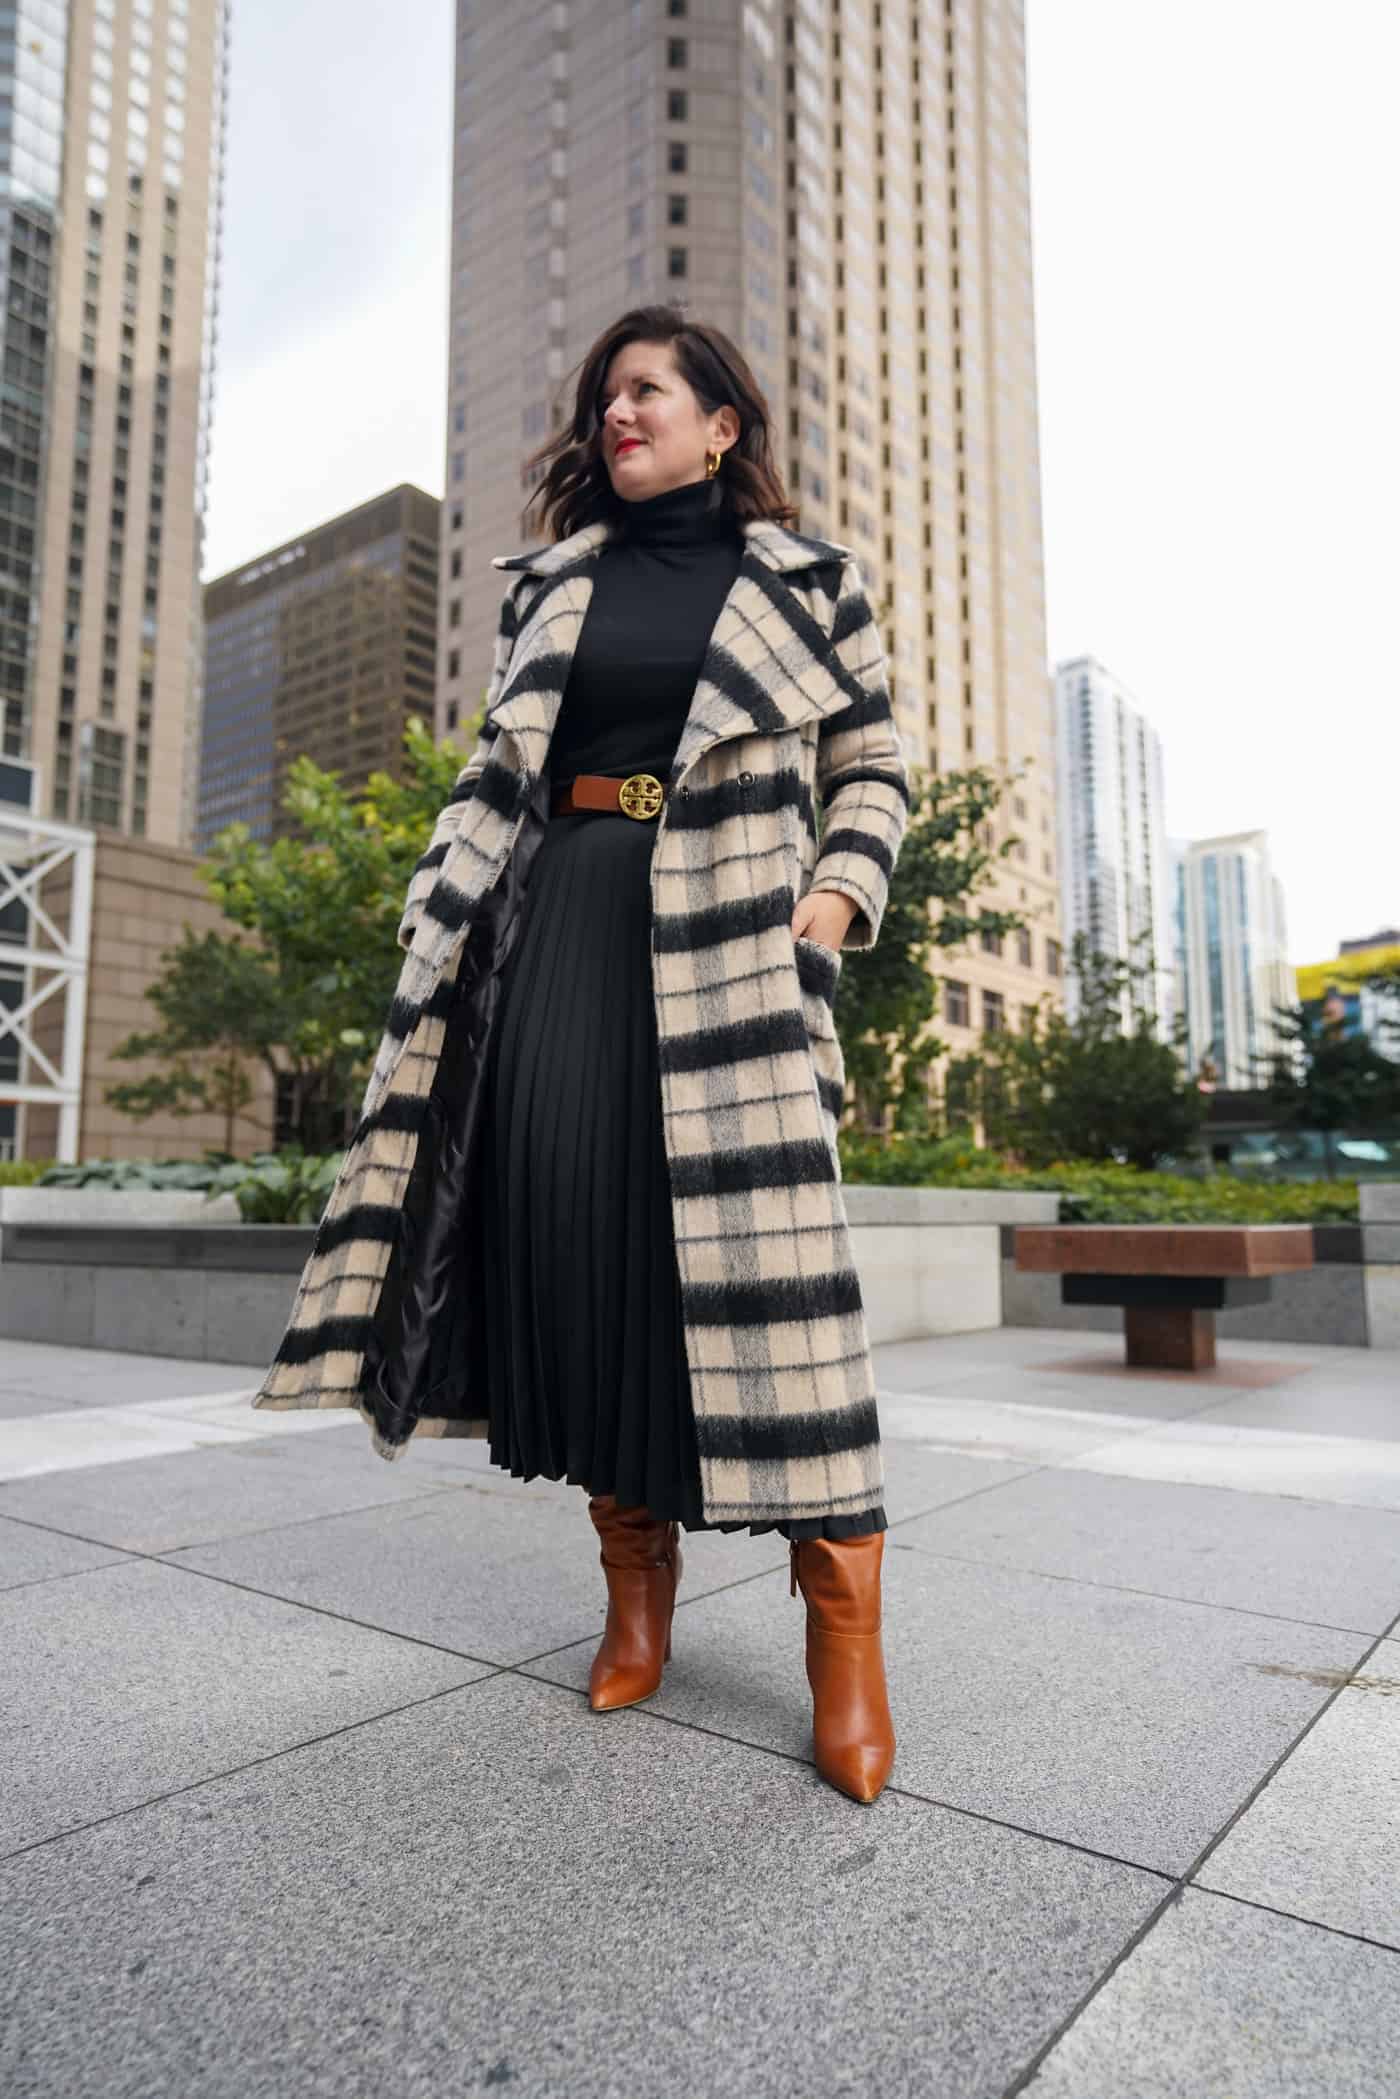 A Lily Love Affair shares a womens plaid coat outfit with a long plaid coat paired with boots and a black pleated skirt